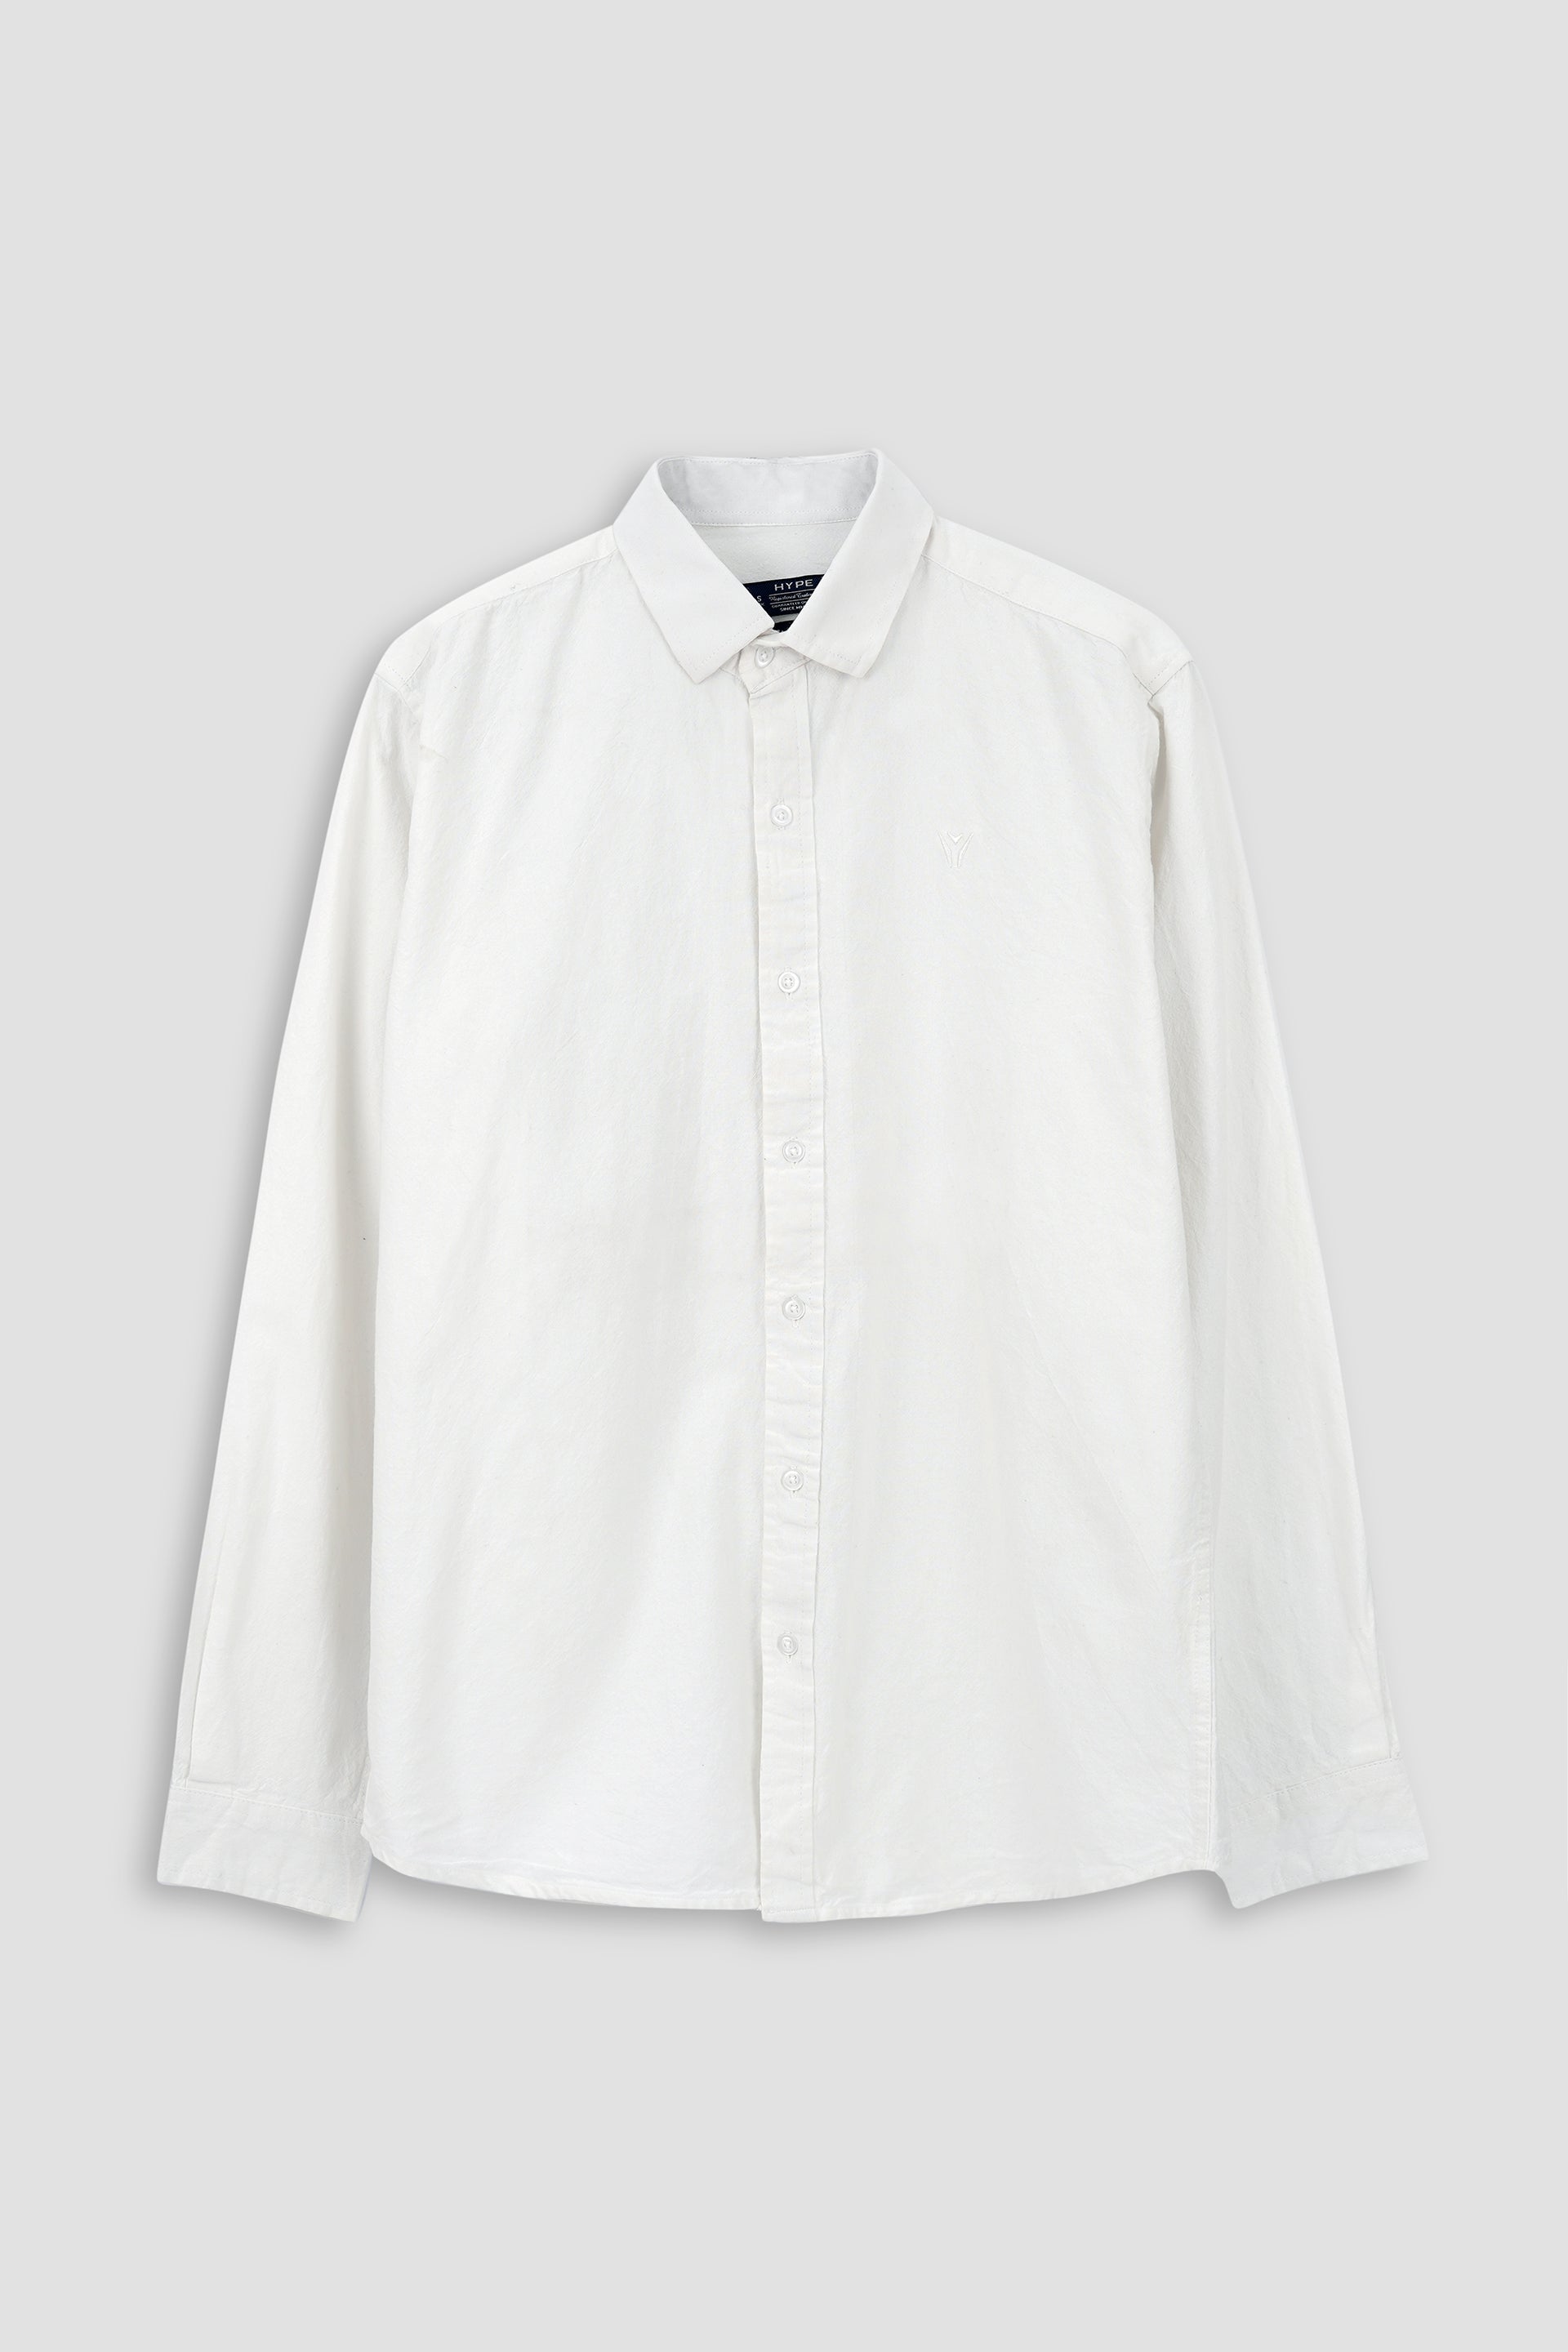 White Soft Cotton Embroidered Casual Shirt 002363